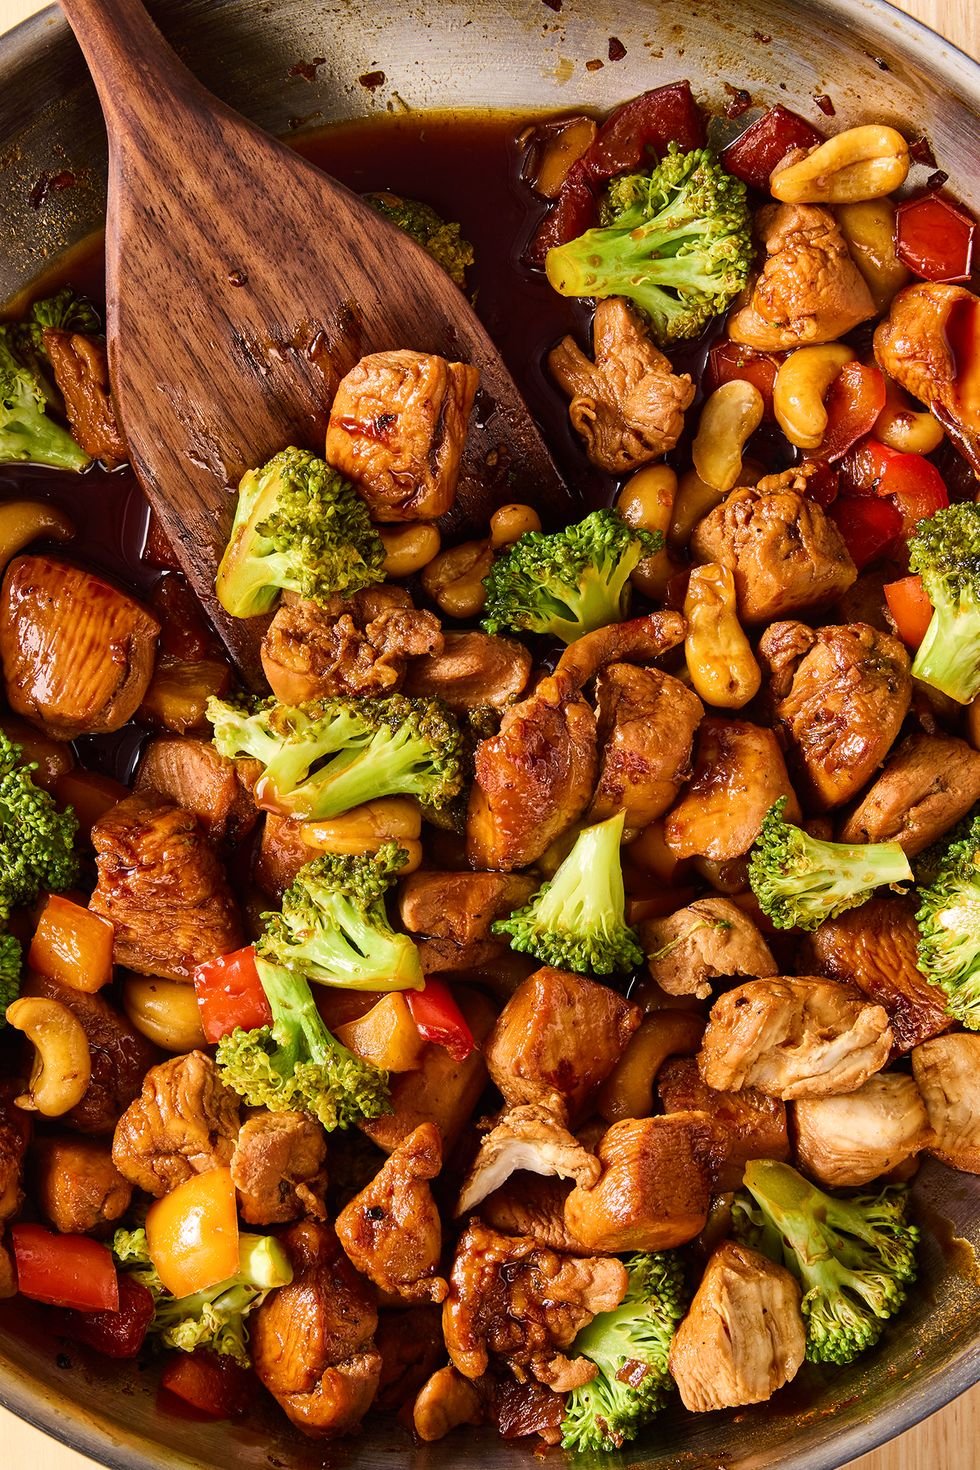 Chicken Stir Fry in a pan with a wooden spoon